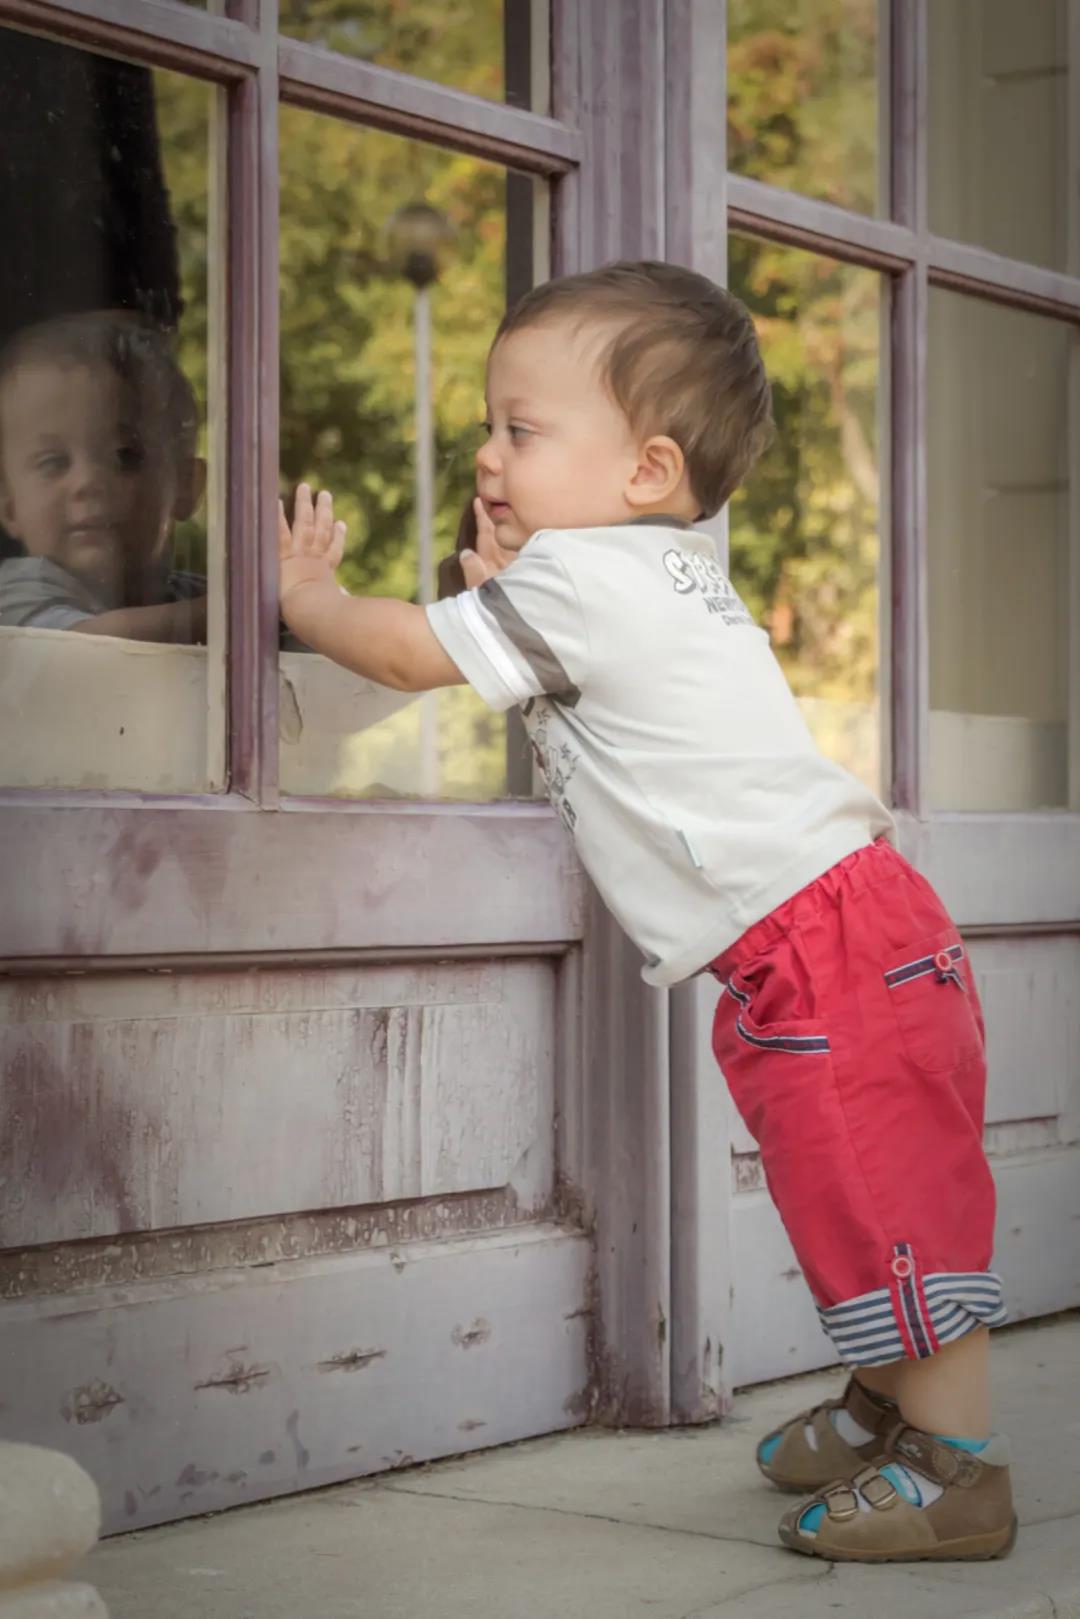 Why Are Mirrors Good for Baby? | Pathways.org